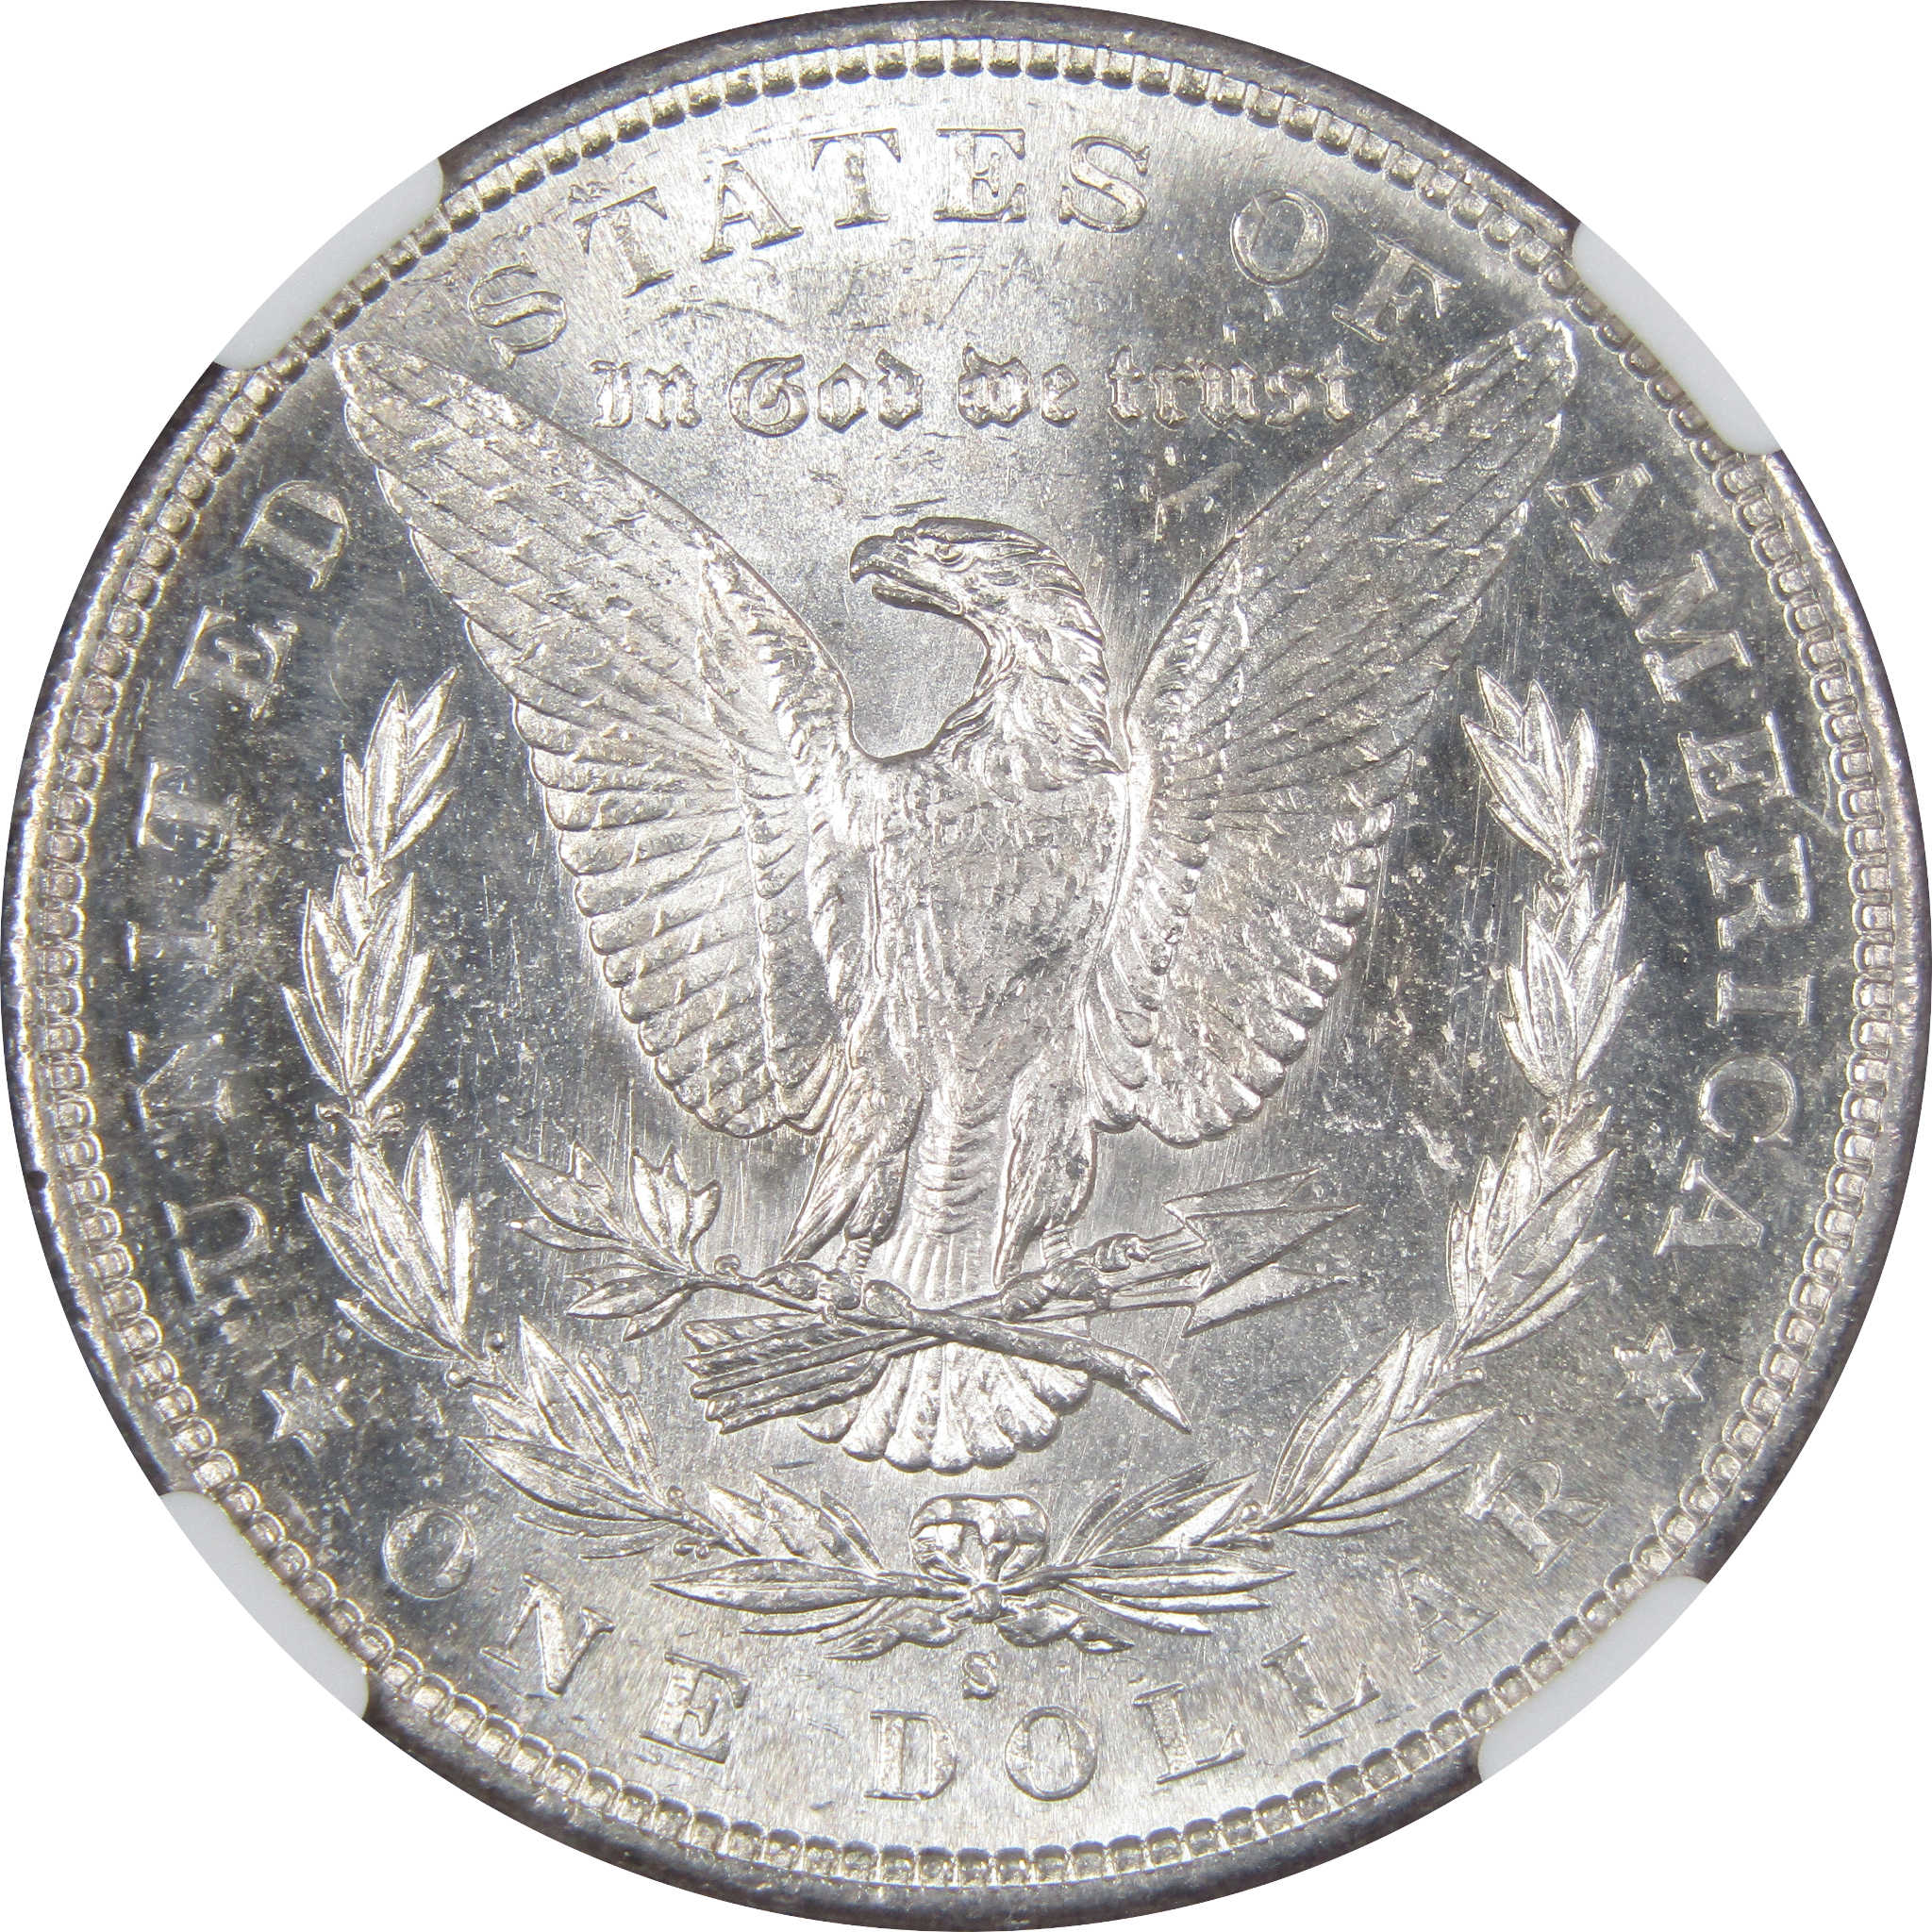 1885 S Morgan Dollar MS 62 NGC 90% Silver Uncirculated SKU:IPC5696 - Morgan coin - Morgan silver dollar - Morgan silver dollar for sale - Profile Coins &amp; Collectibles